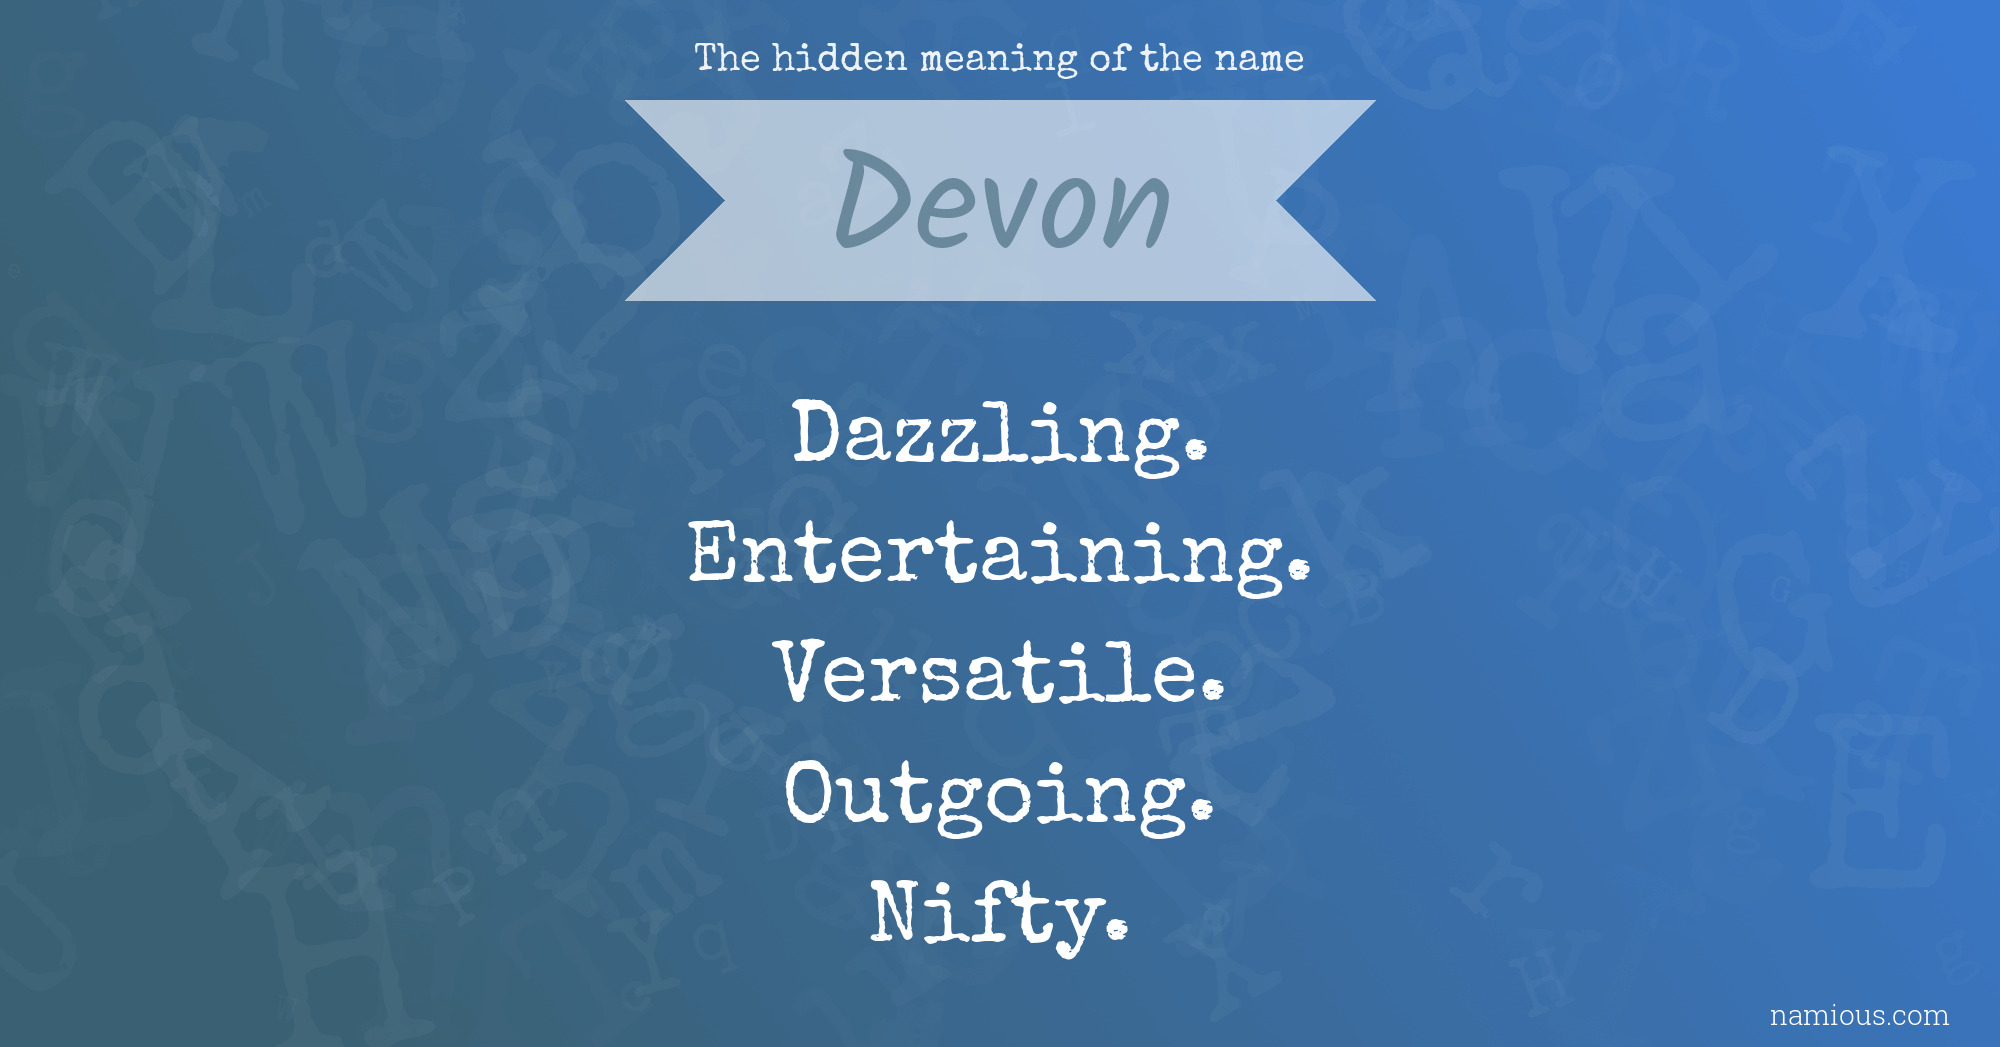 The hidden meaning of the name Devon